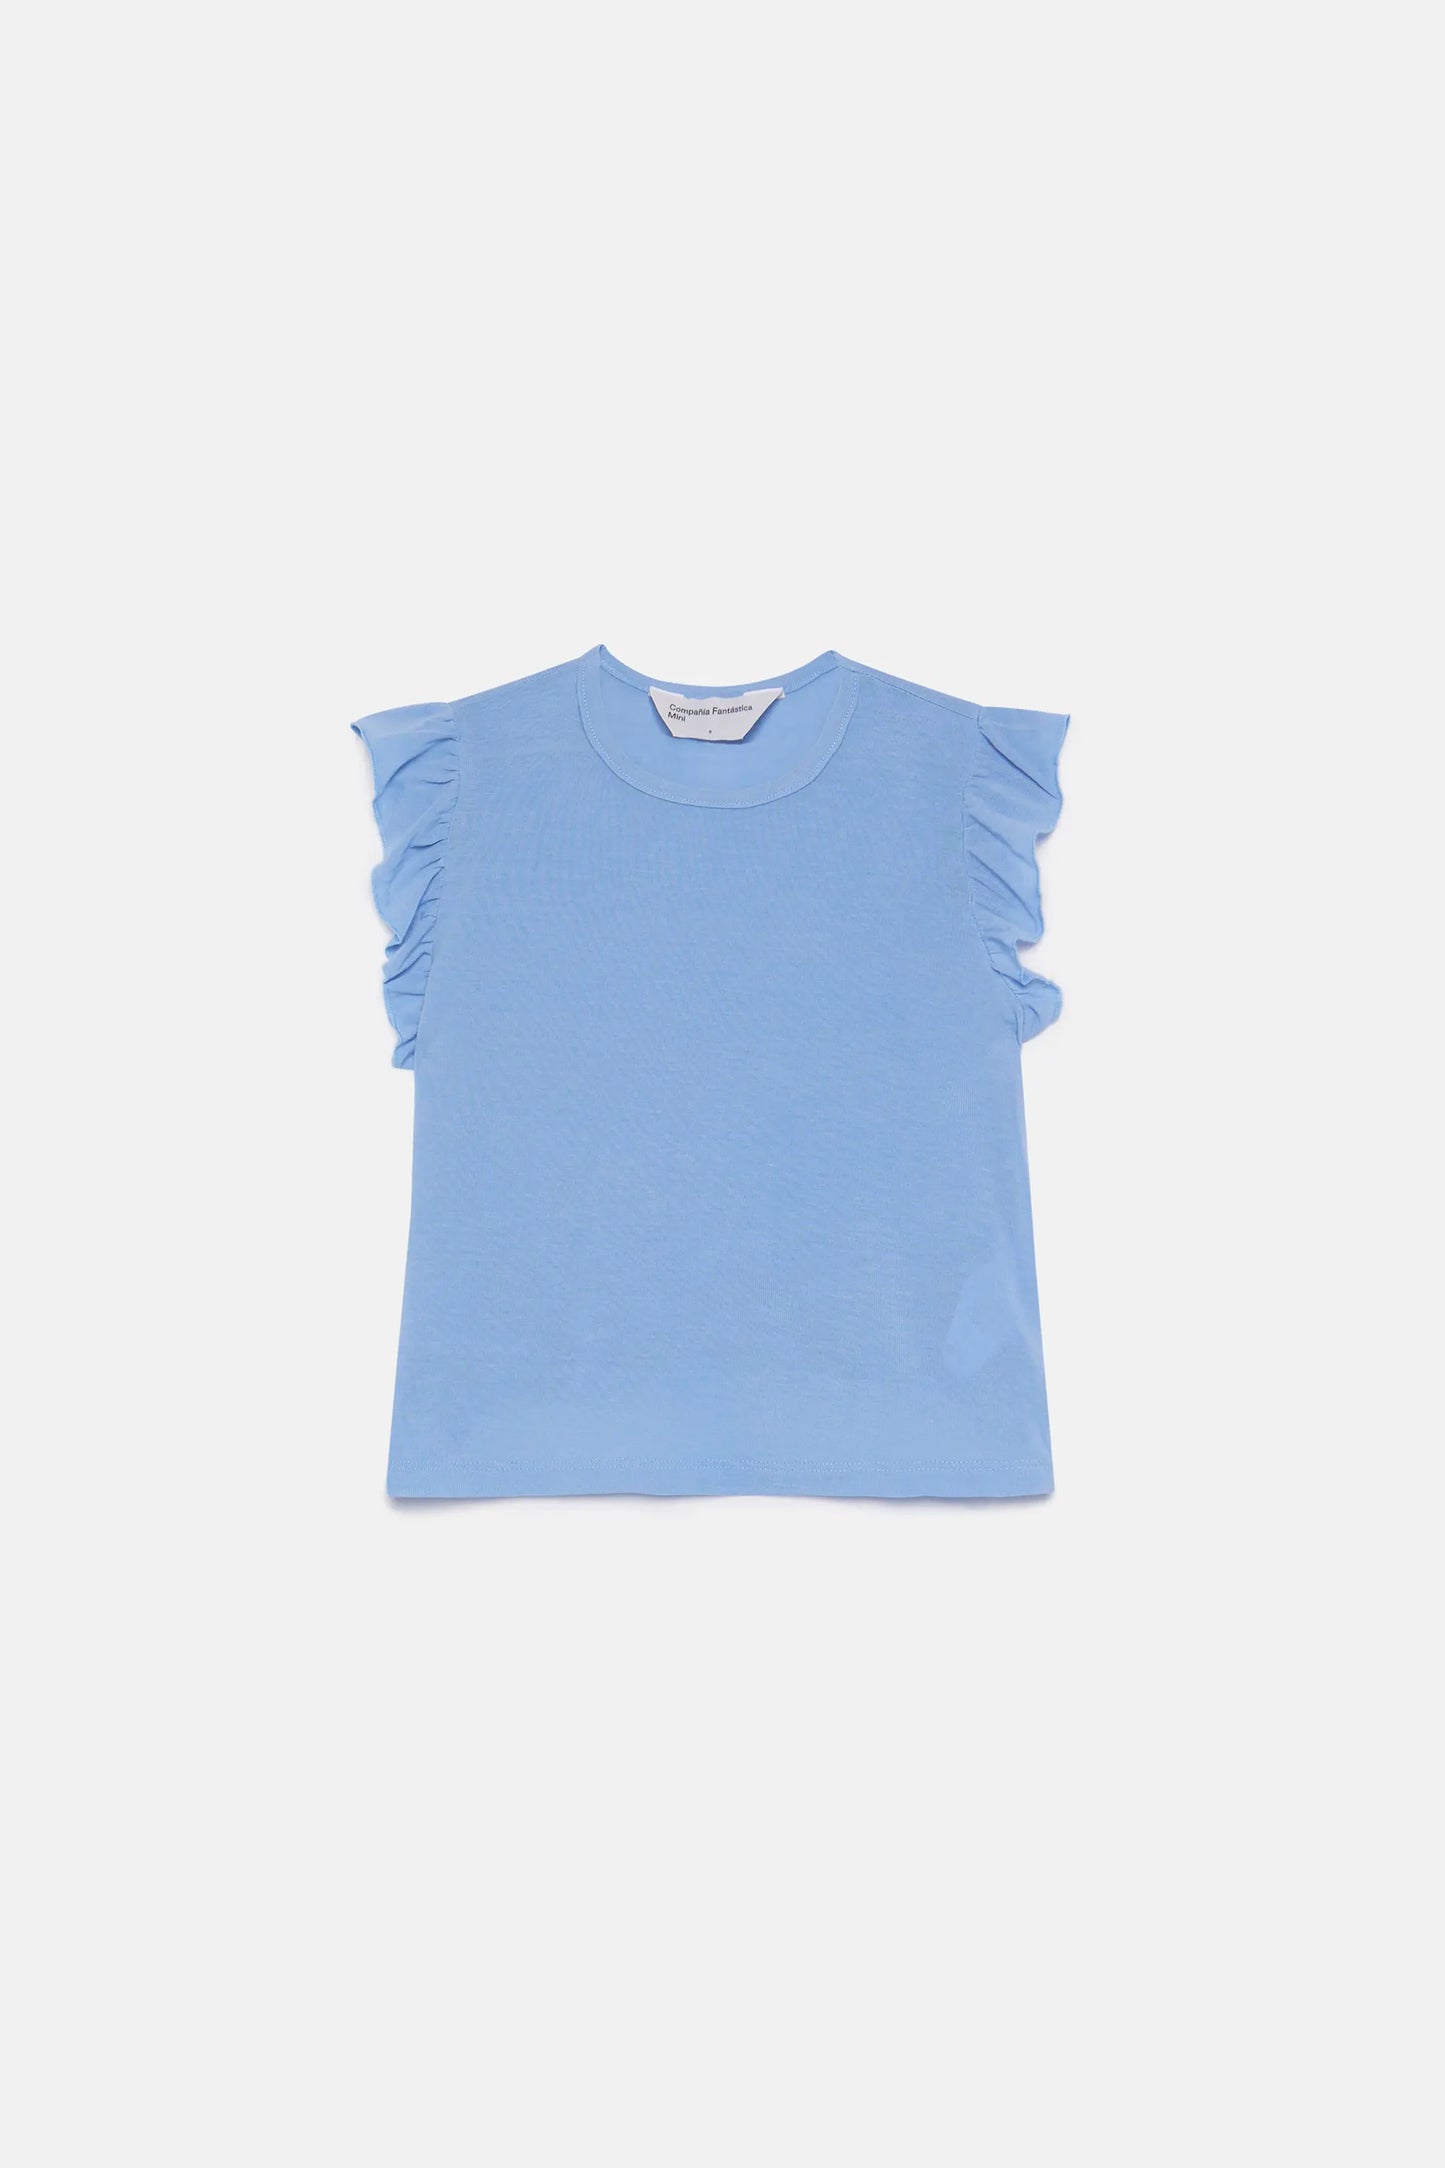 Girl's top with blue ruffles